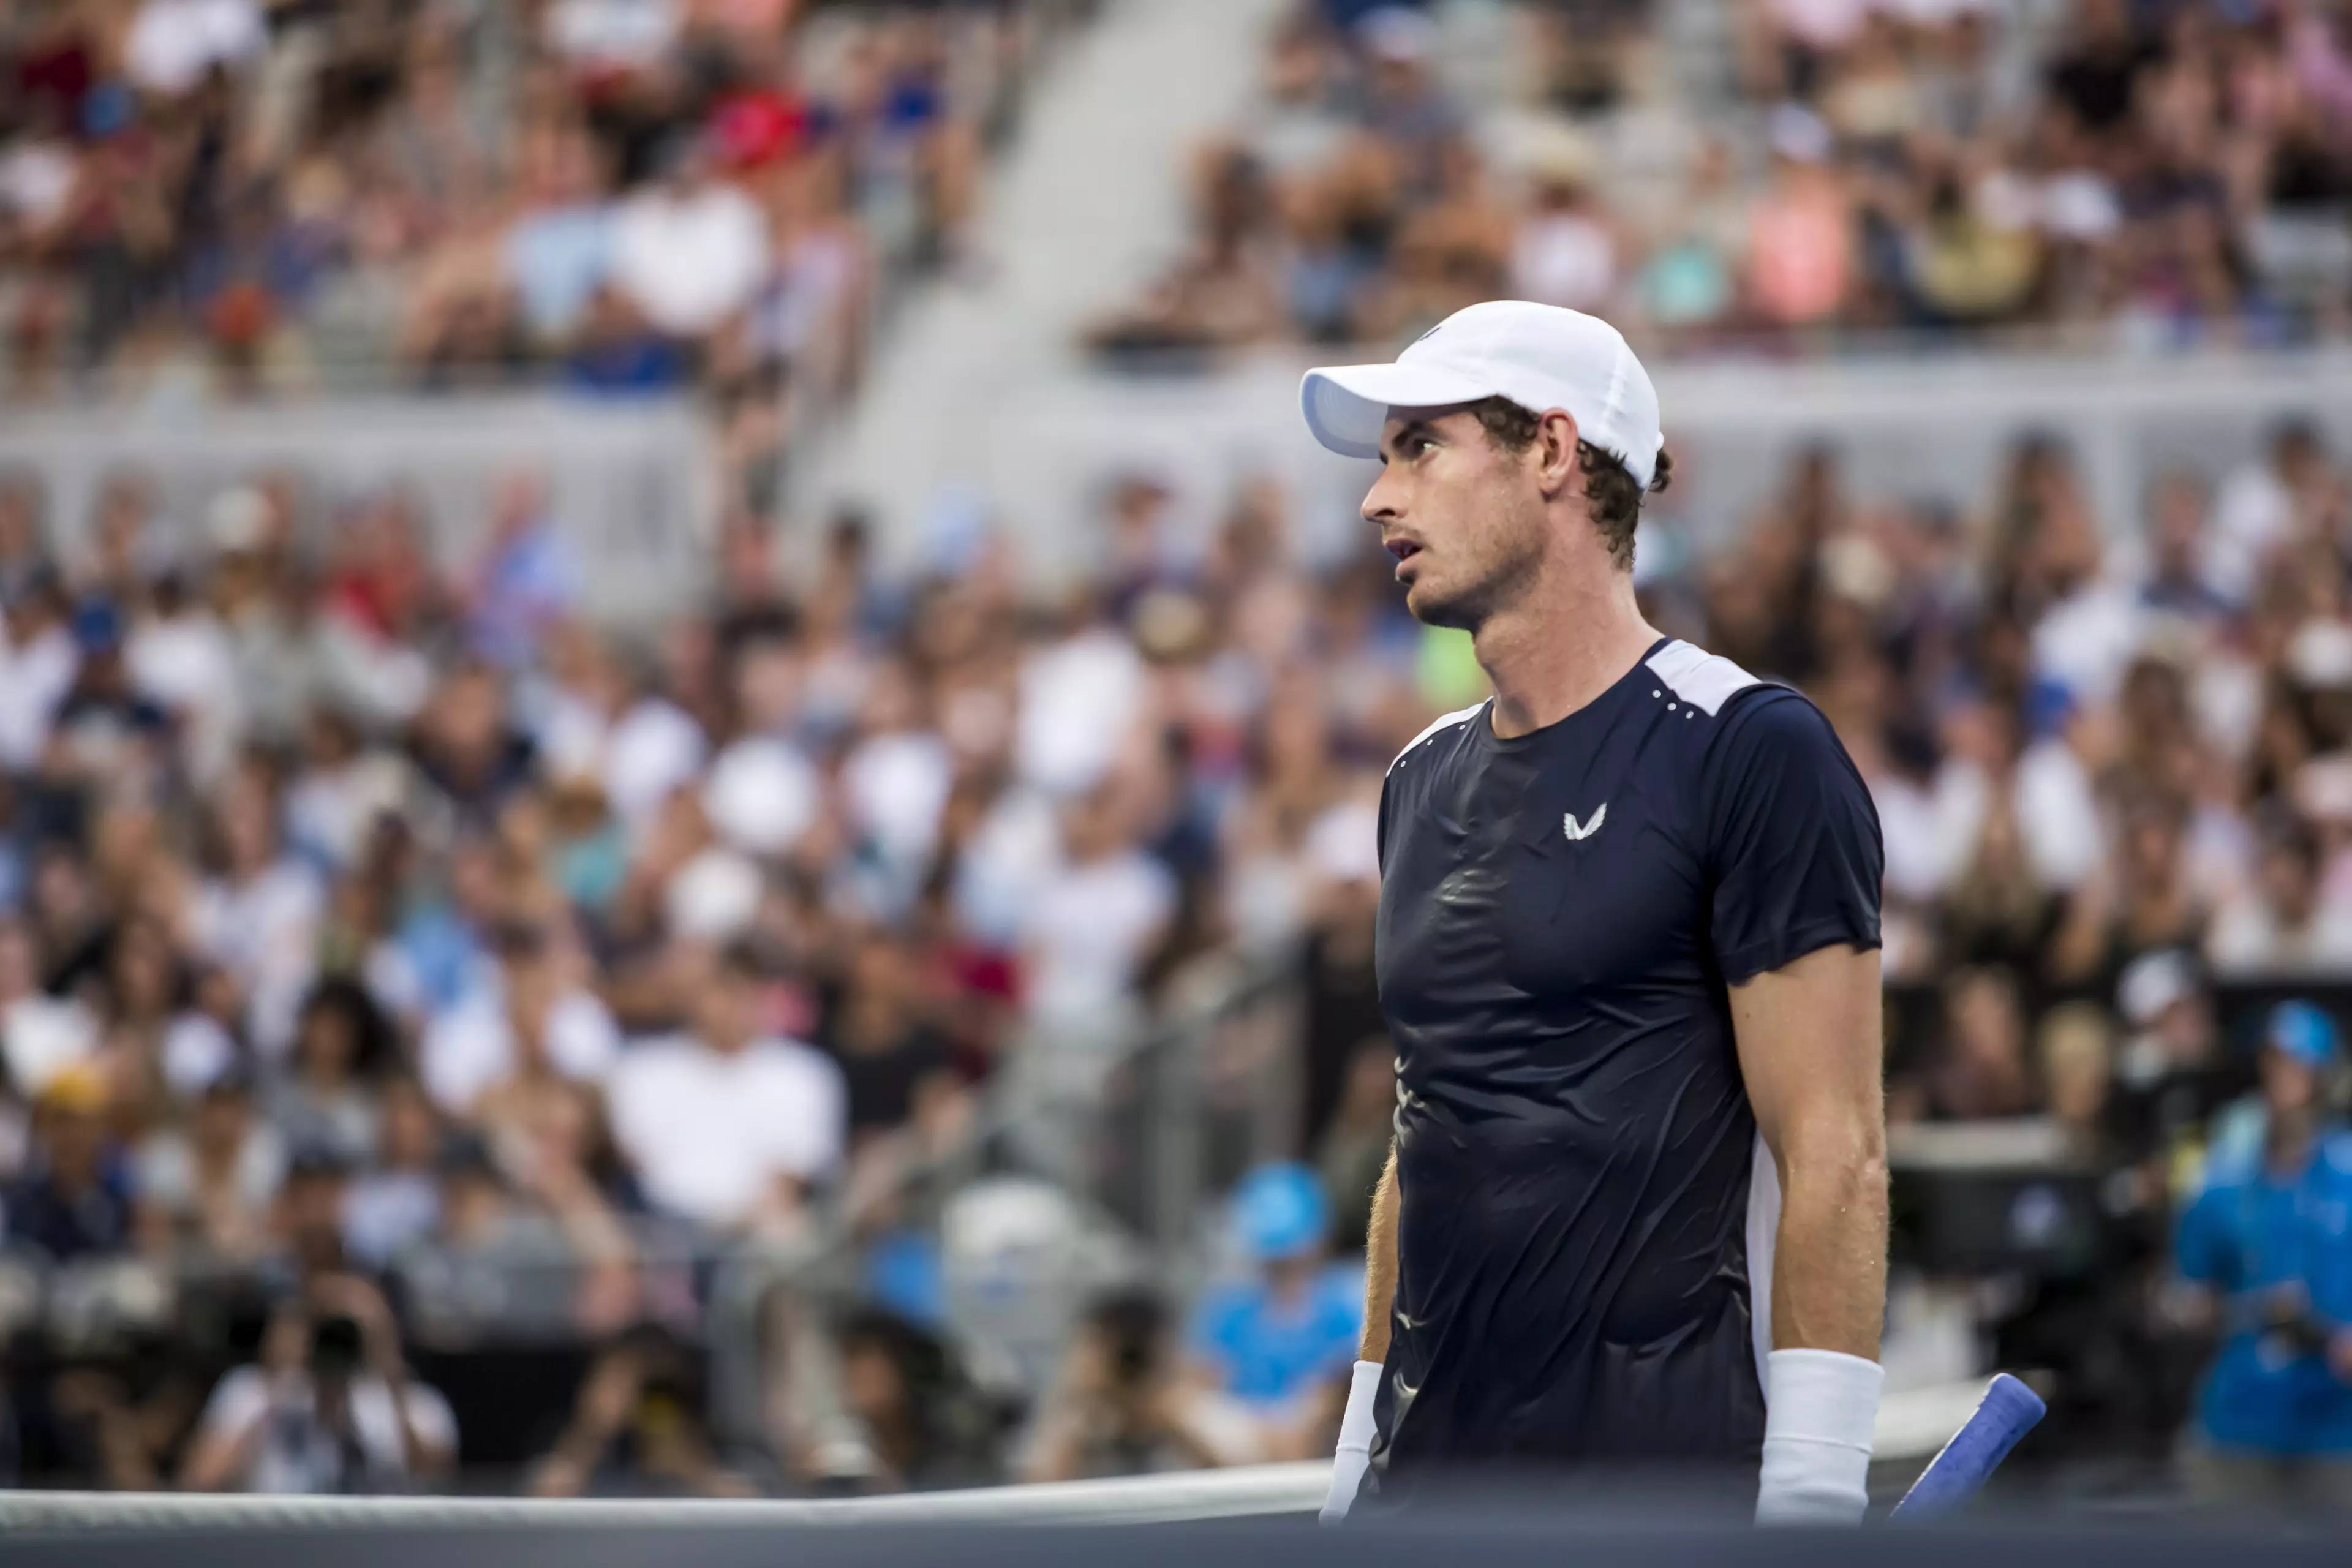 Andy Murray at this year's Australian Open.